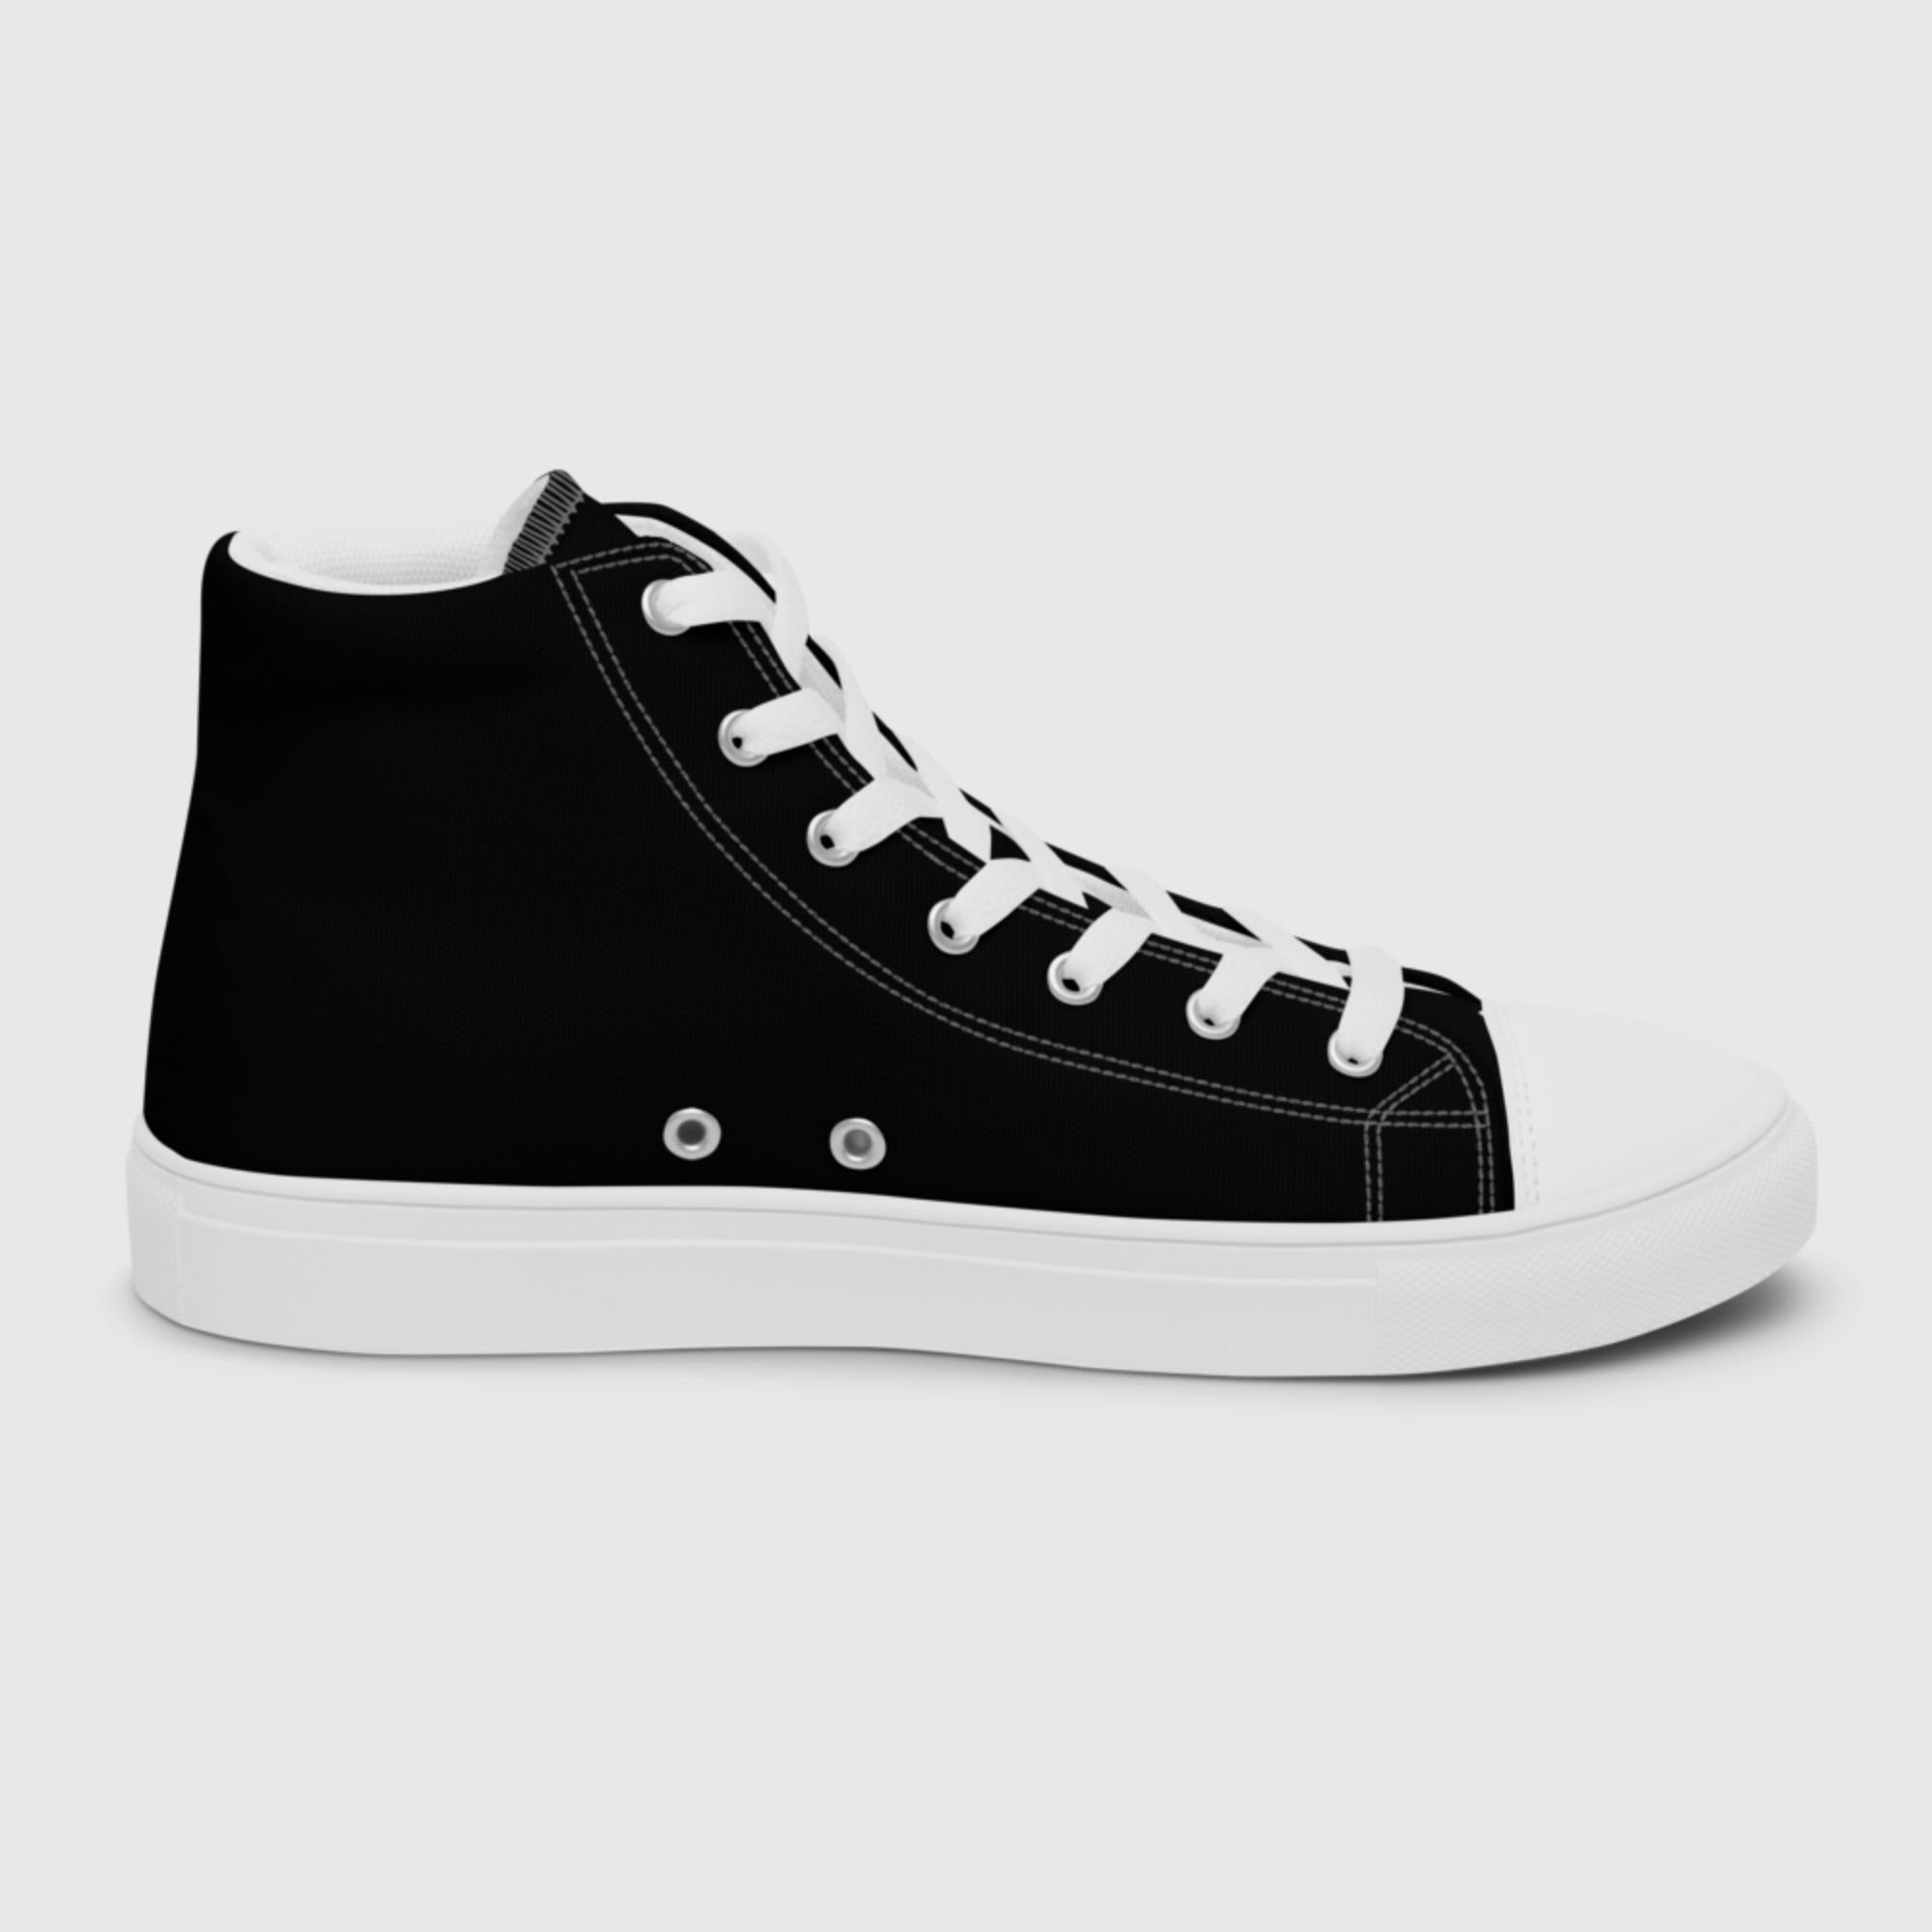 Women’s high top canvas shoes - Black - Sunset Harbor Clothing